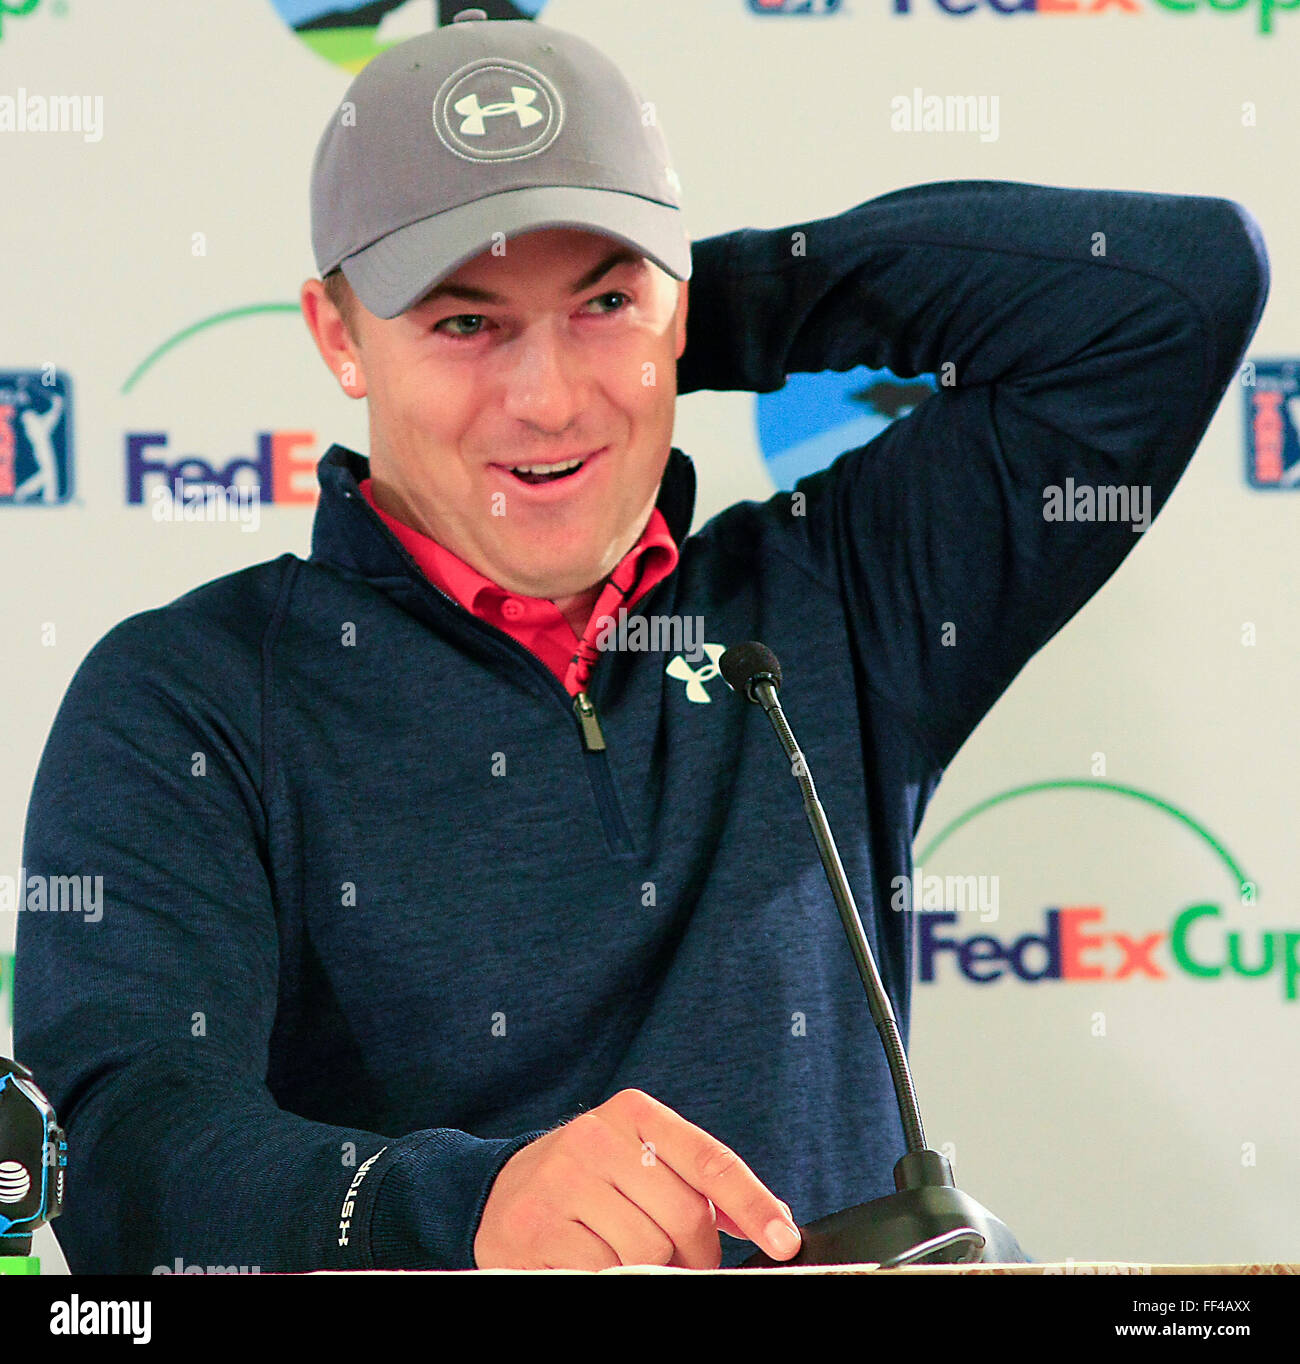 Jordan Spieth, (Texas) the World No.1 golfer talks with the press at the AT&T Pro-Am PGA Tour golf event at Pebble Beach CA, USA Stock Photo